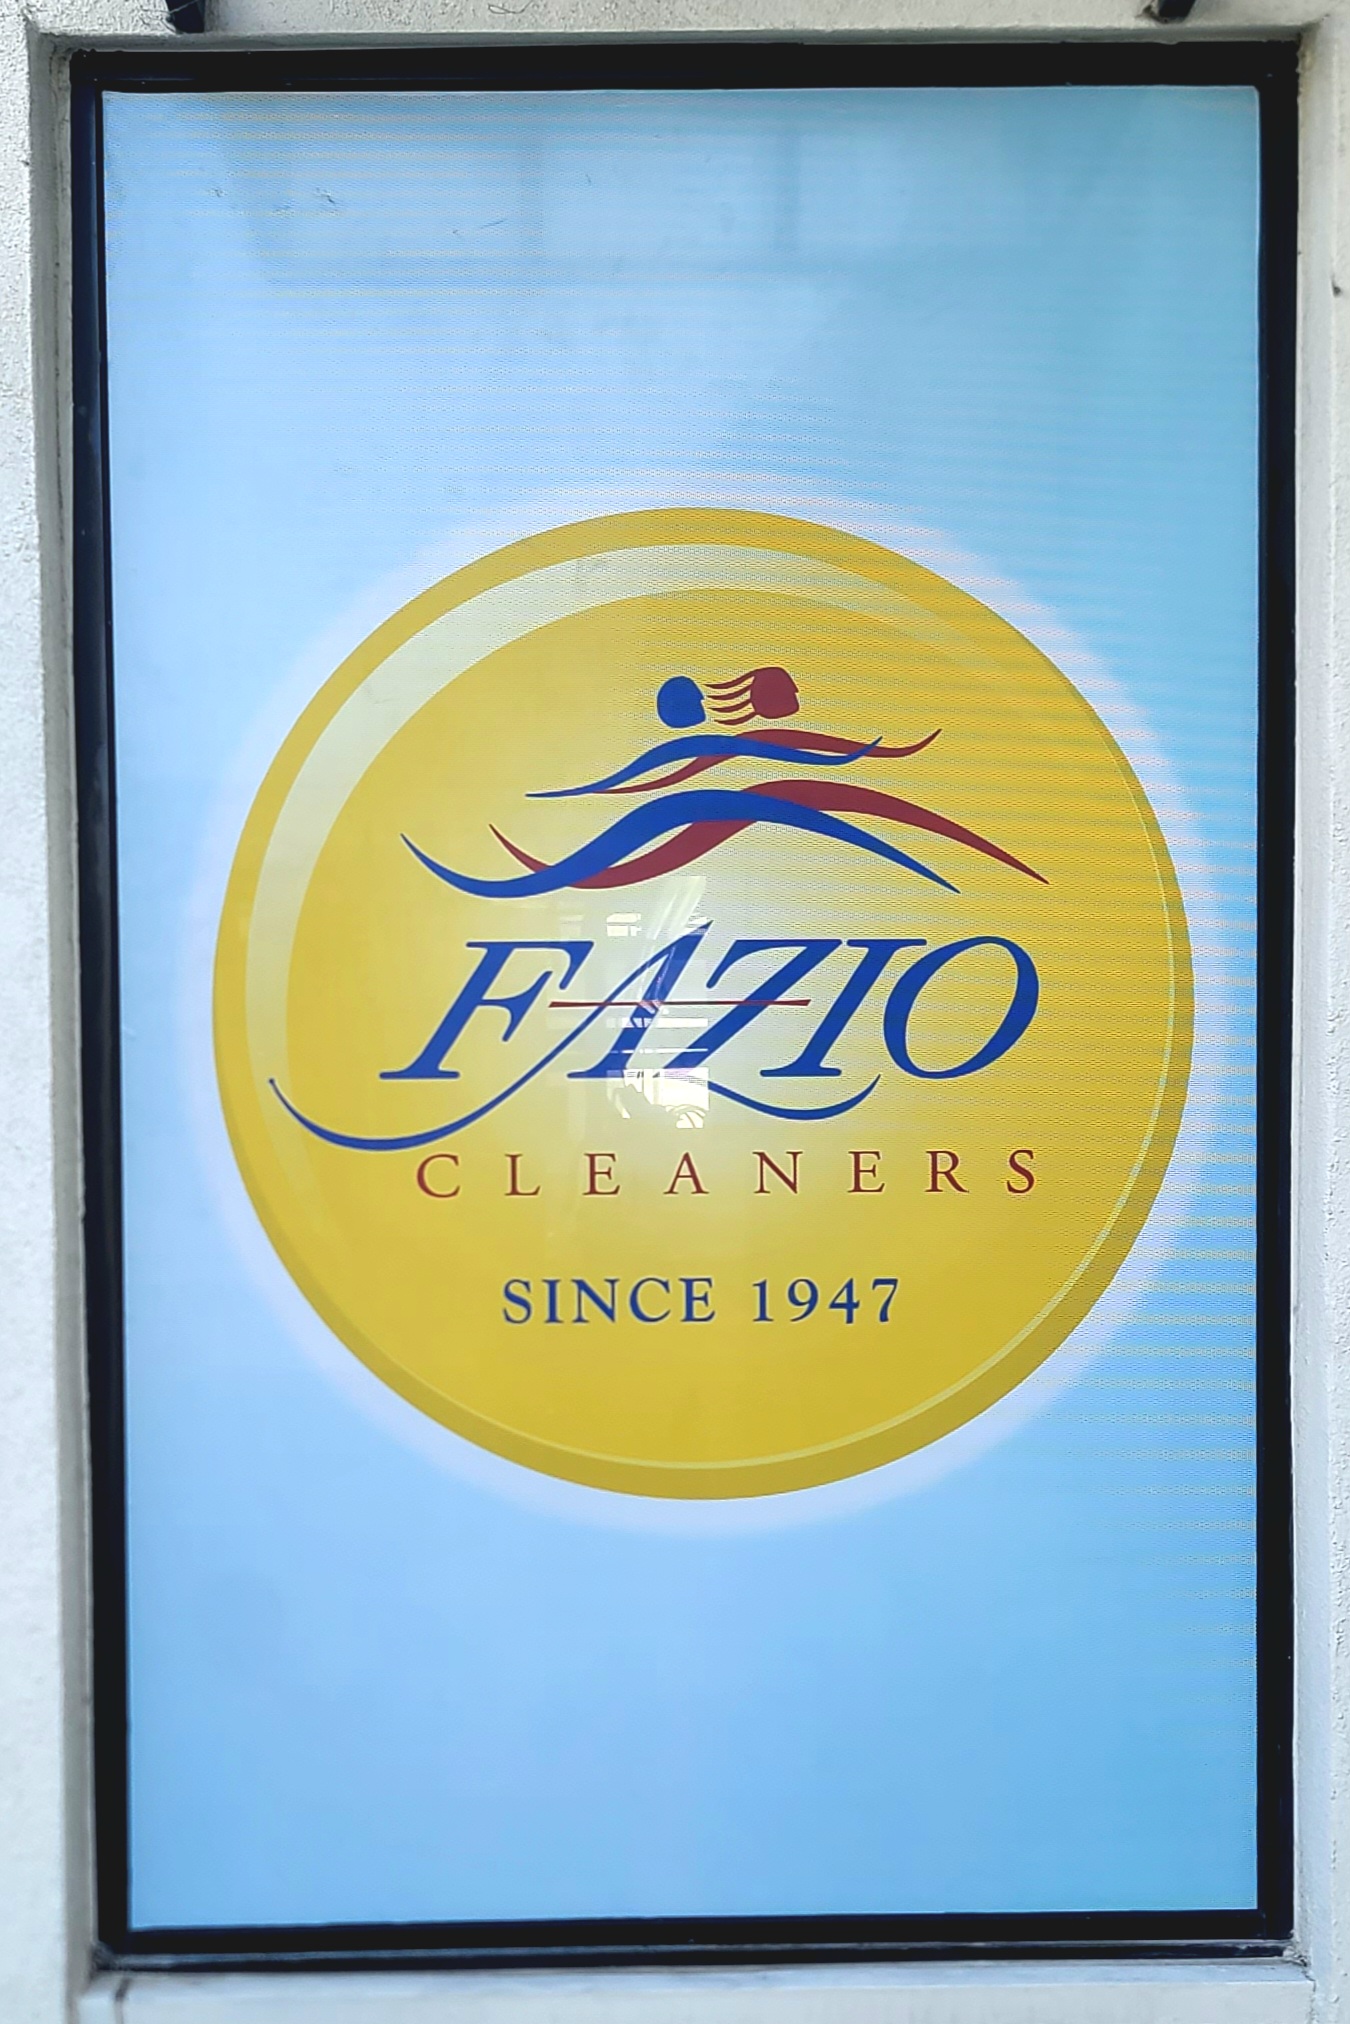 Eye-Catching Elegance: Standout window graphics for Fazio Cleaners